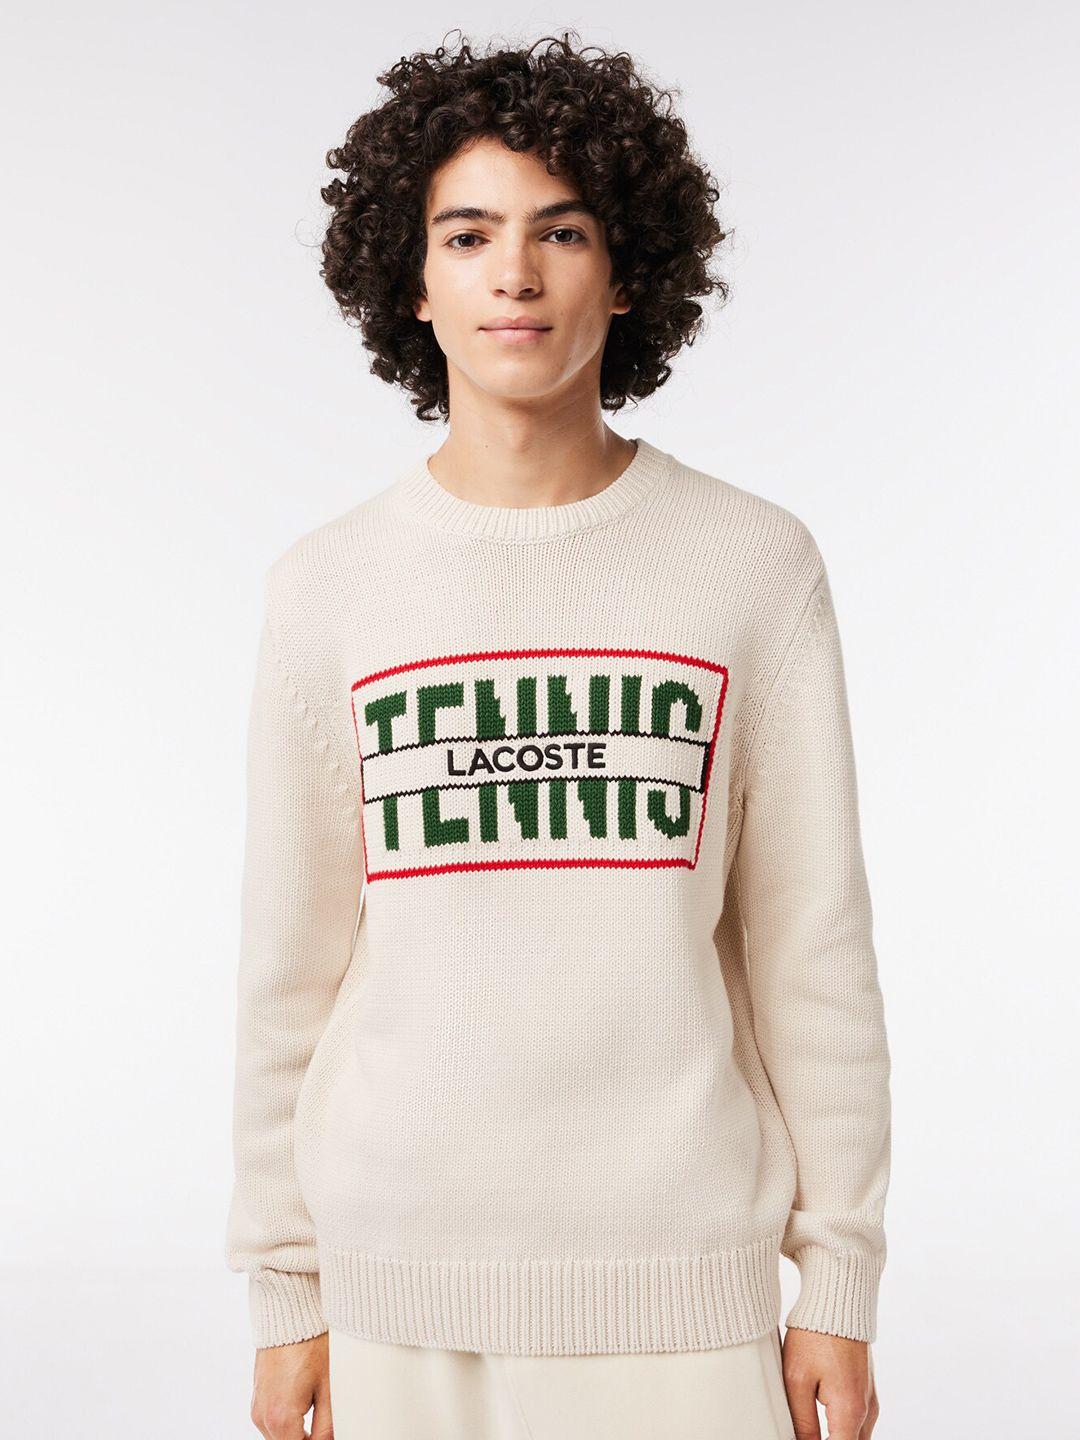 lacoste typography printed pullover sweater